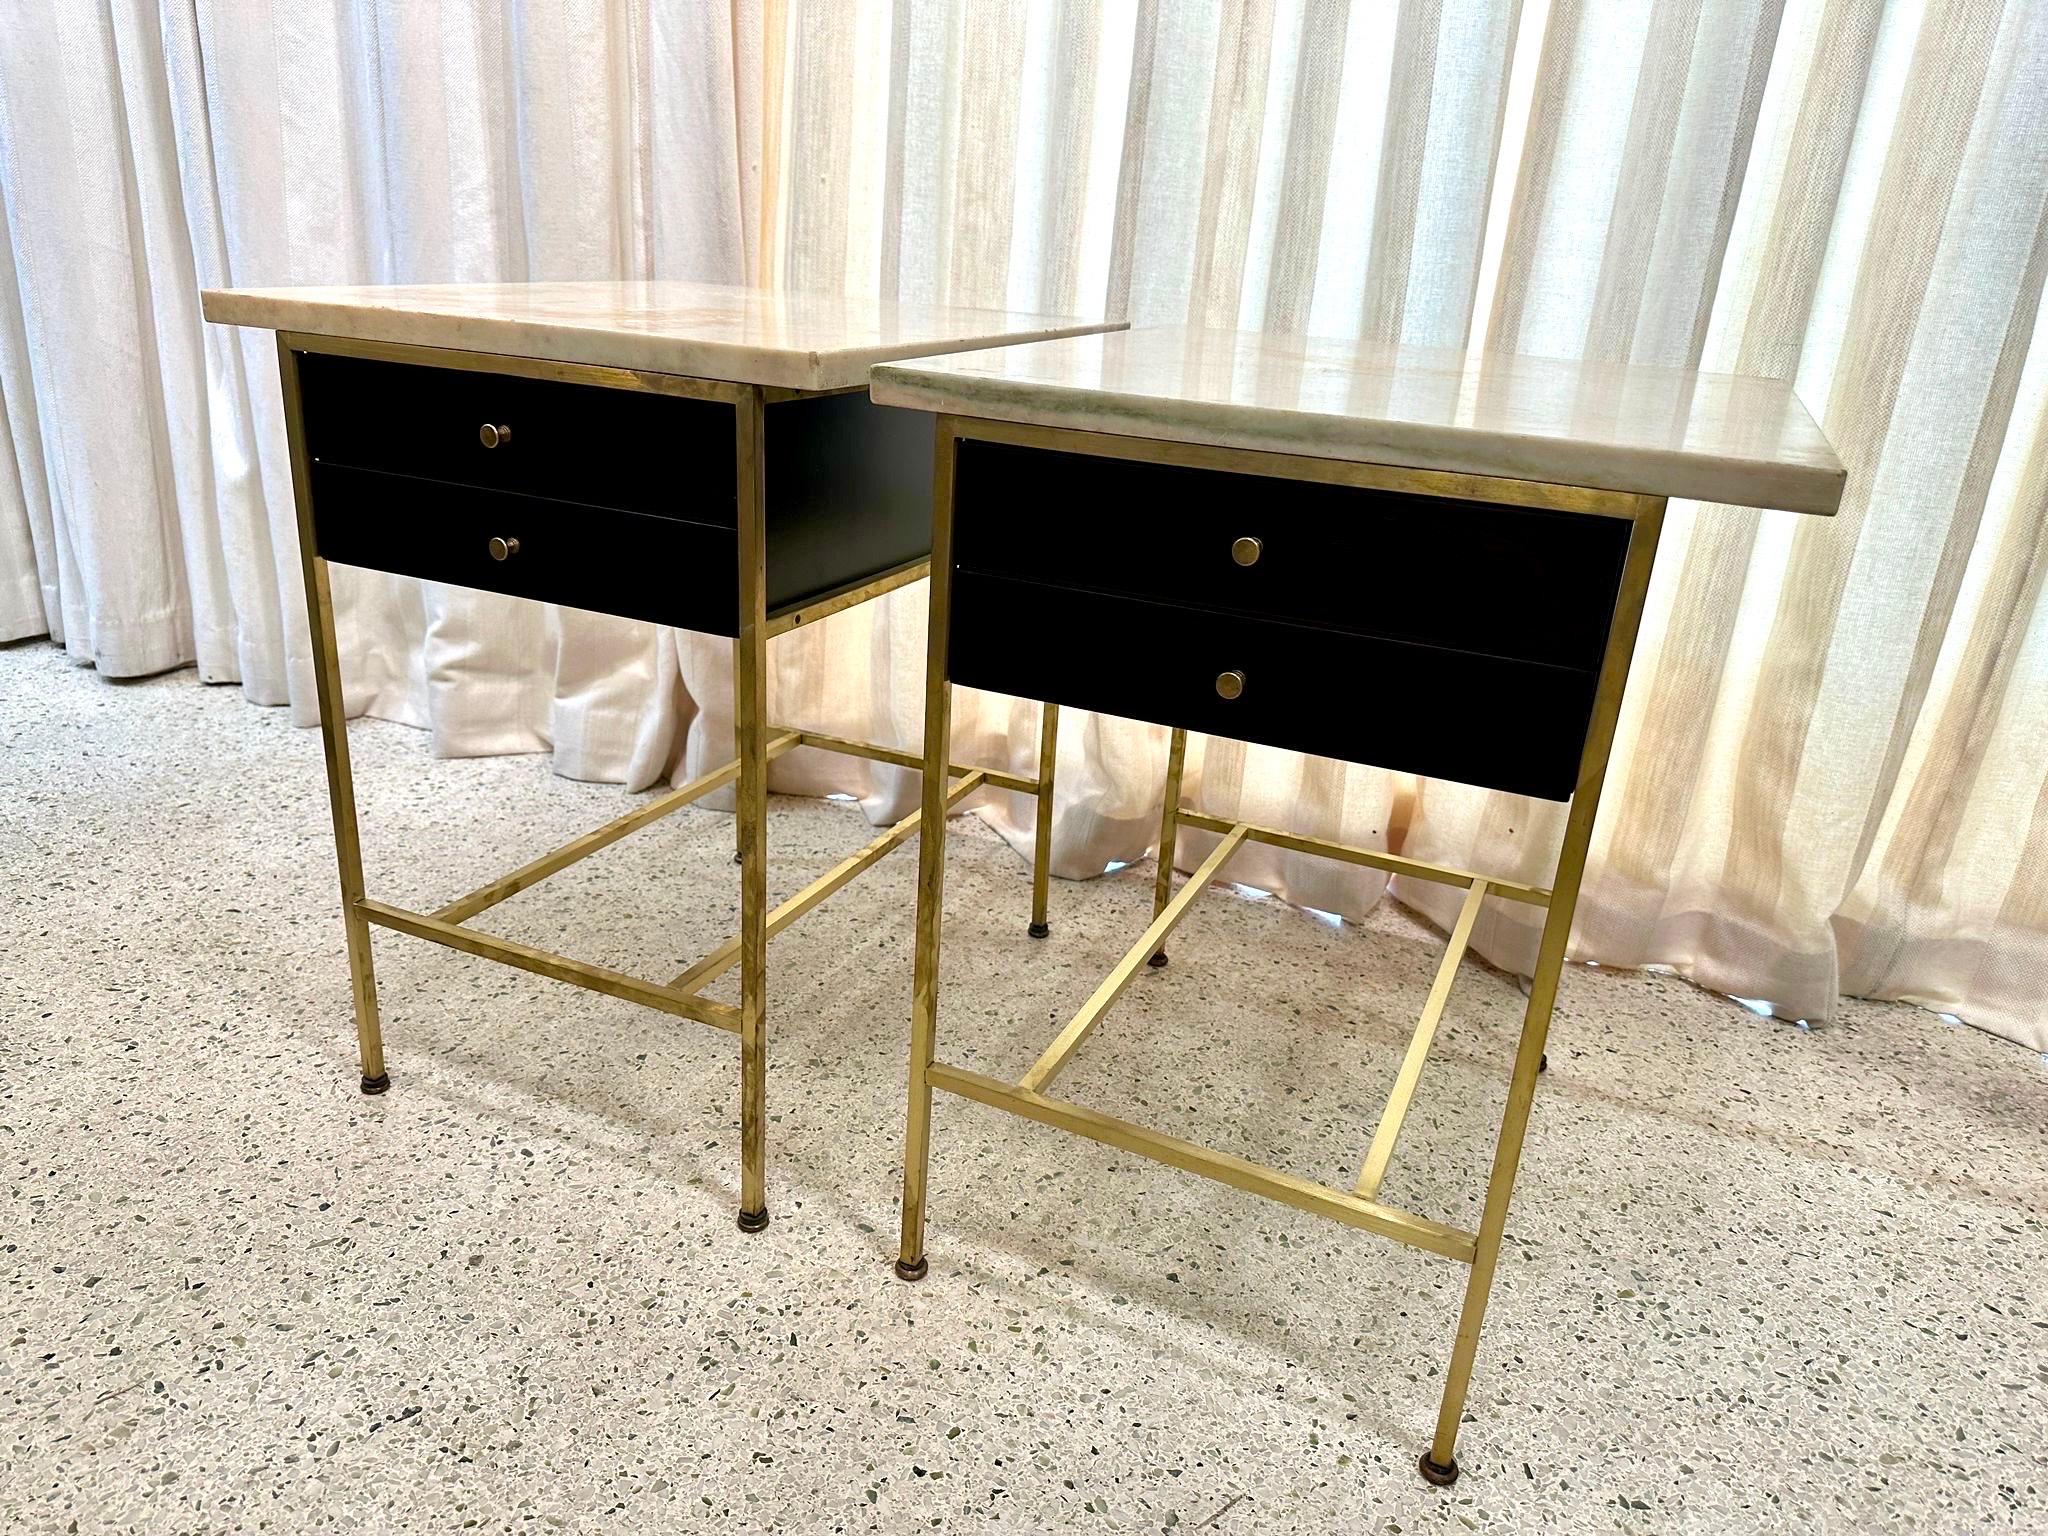 Rare pair of Paul Mccobb side tables retaining the original marble tops. Part of the Irwin Collection by Calvin Furniture Co.. McCobb employs a wonderful mix of dark brown Mahogany and brass.

The wood two-drawer case is suspended in an